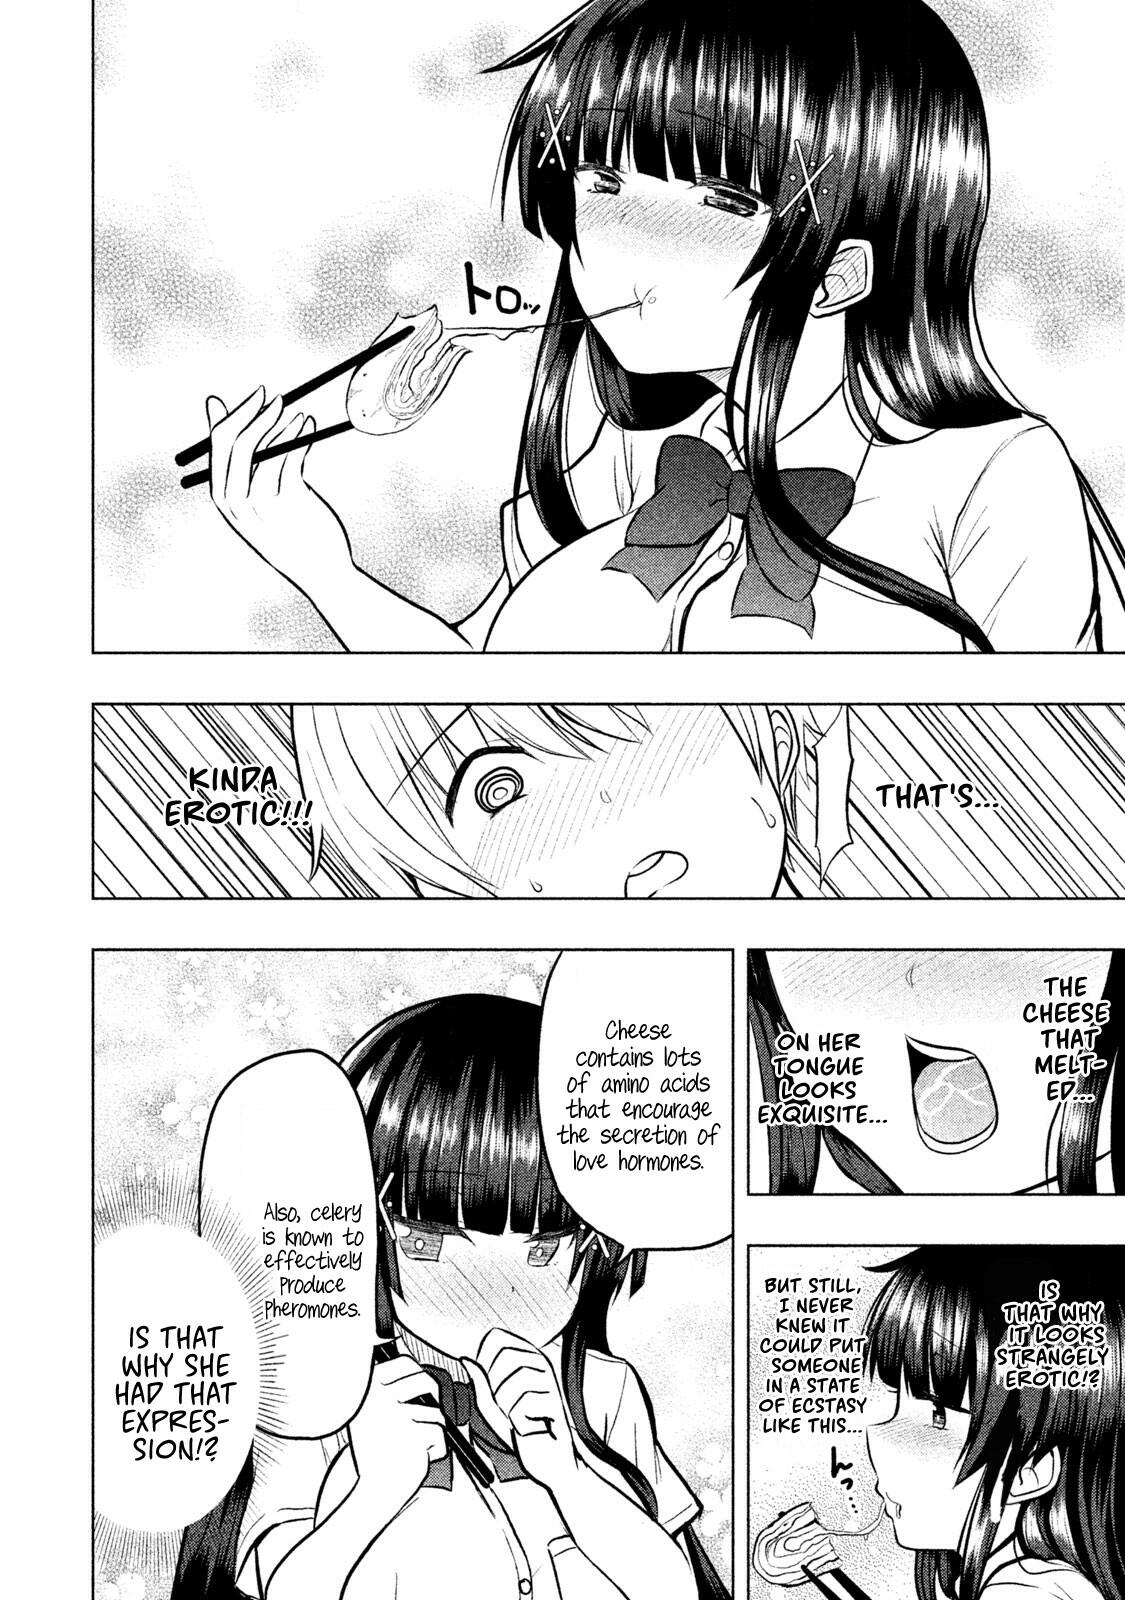 A Girl Who Is Very Well-Informed About Weird Knowledge, Takayukashiki Souko-San Chapter 21: Lunch Box page 5 - Mangakakalots.com